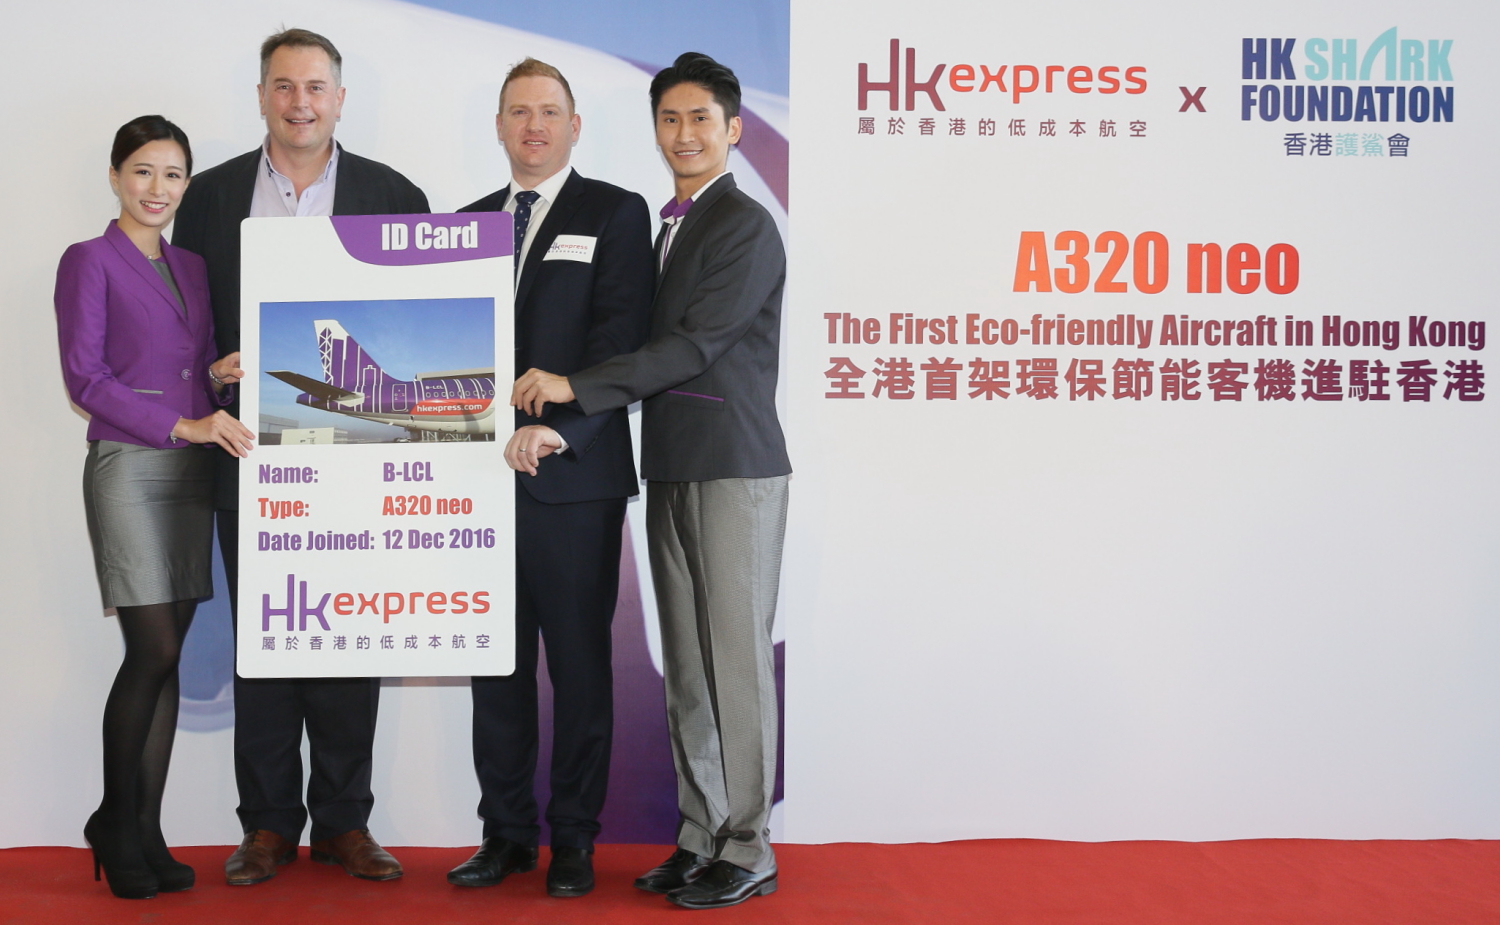 Mr. Andrew Cowen, Director and CEO of HK Express (middle left) receives an HK Express ID Card from Mr. Ronan Stewart, Chief Executive, Commercial of Santos Dumont (middle right).